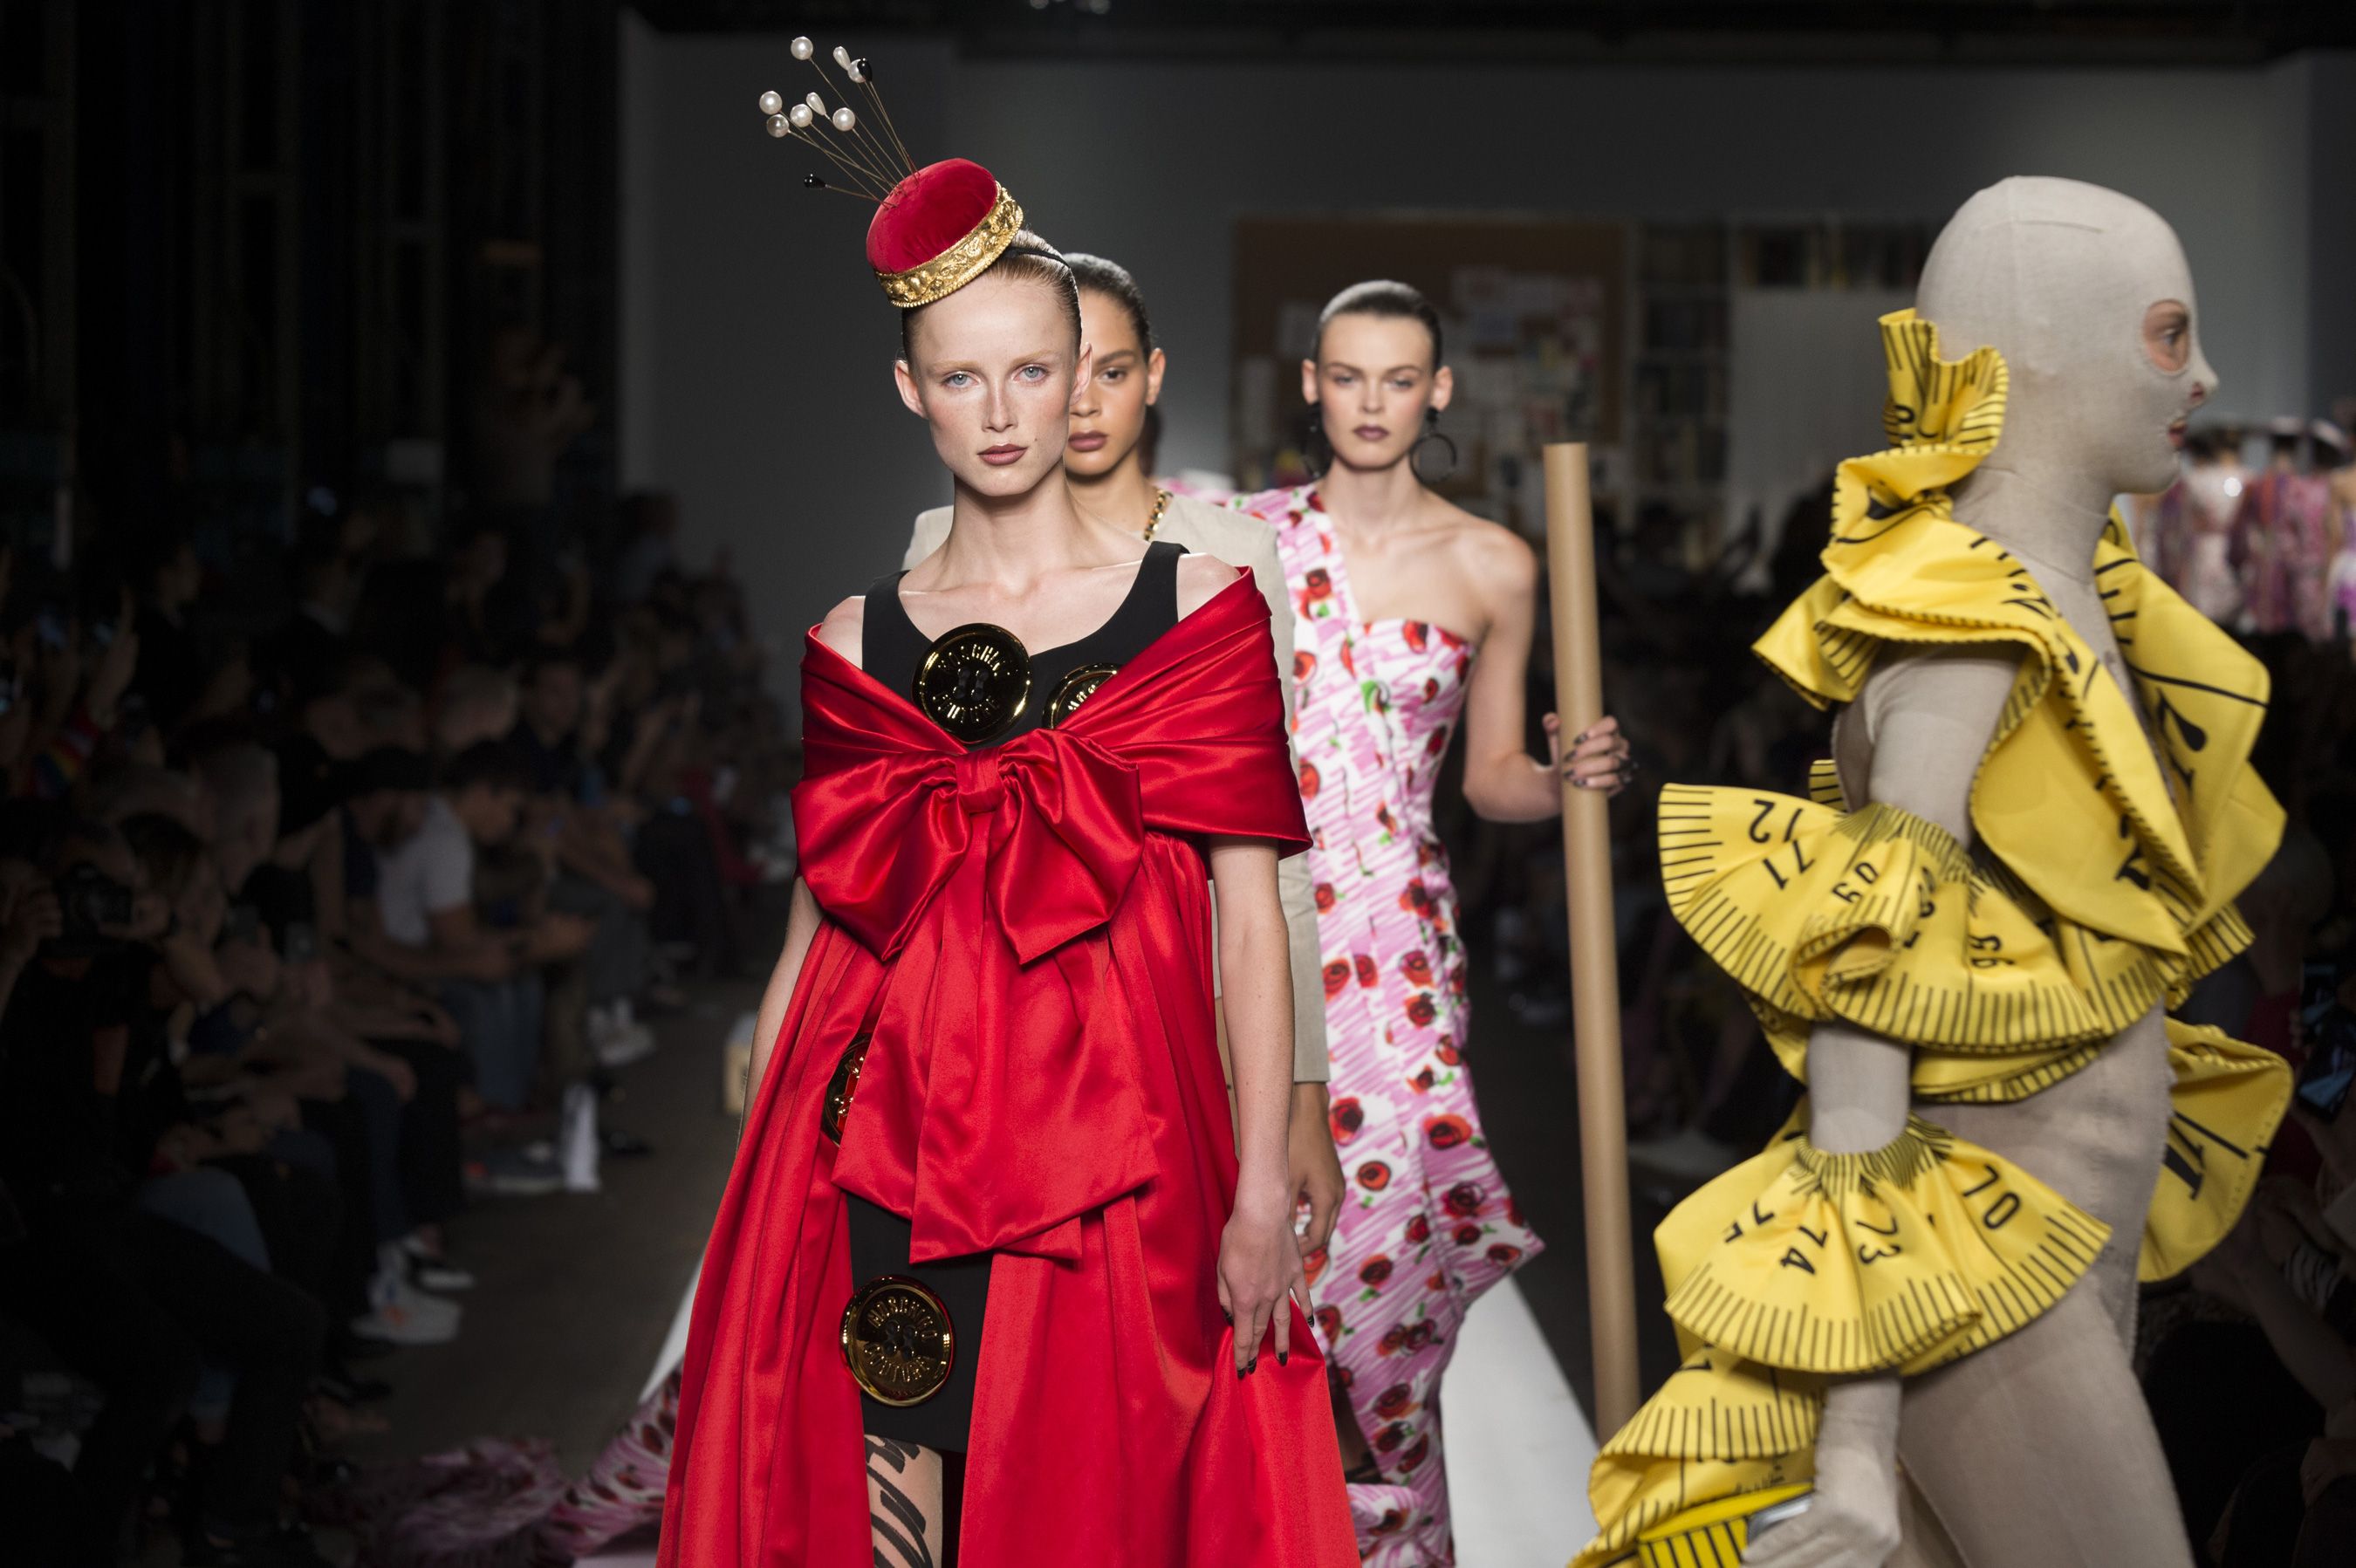 Fashion Show - Moschino Pre-Fall 2019 - Catwalk - Cinecitta Studios  Featuring: Model Where: Rome, Italy When: 08 Jan 2019 Credit: IPA/WENN.com  **Only available for publication in UK, USA, Germany, Austria, Switzerland**